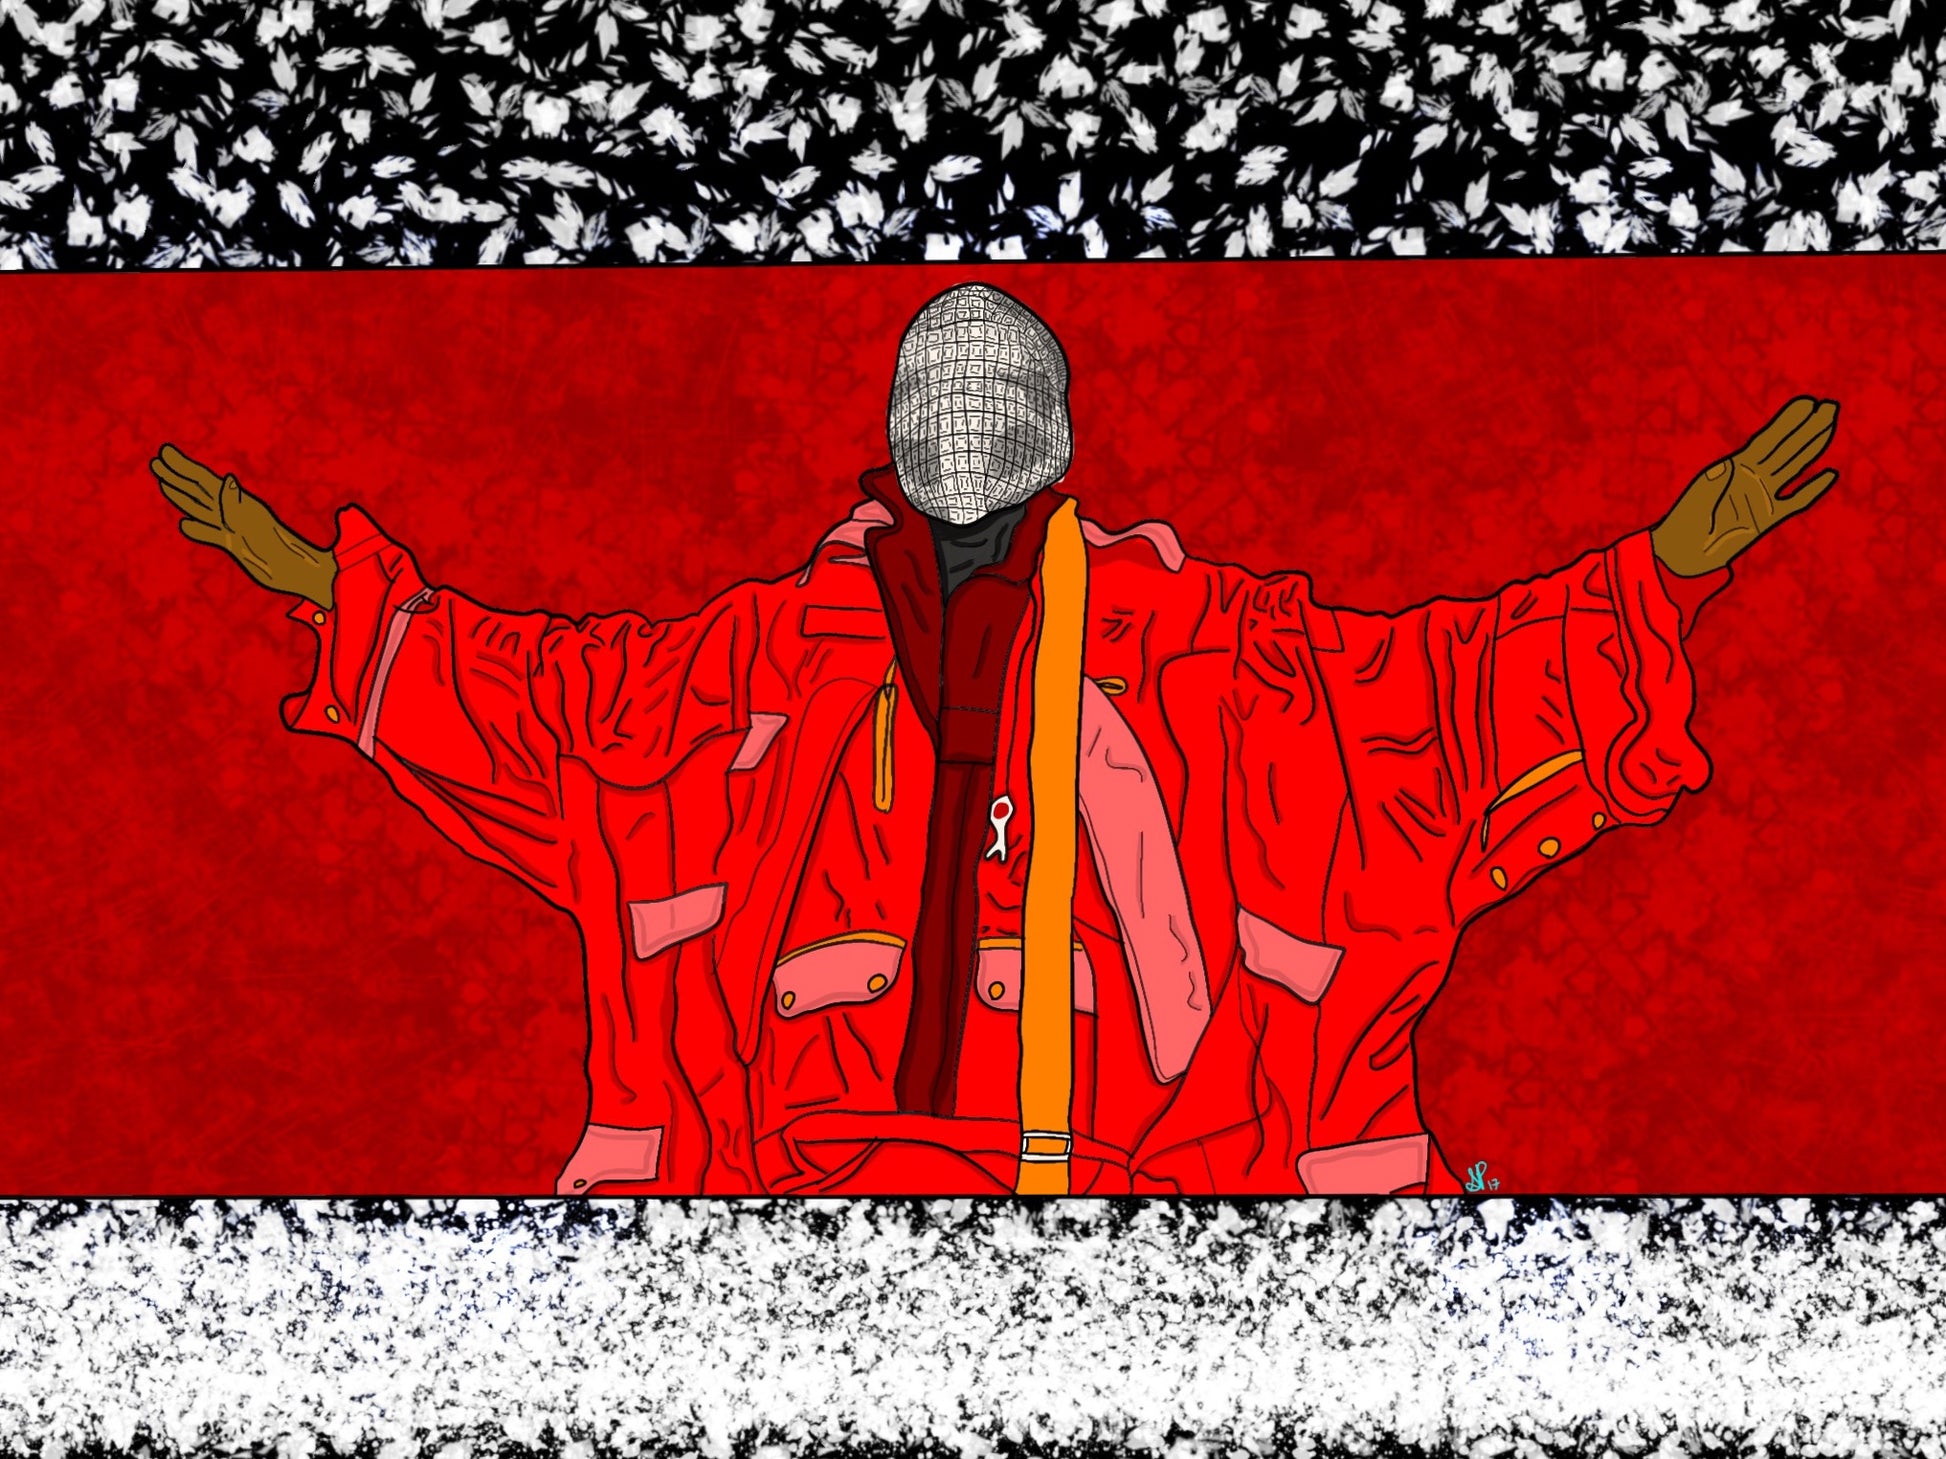 KANYE WEST - RED OCTOBER - Limited Print by BOYSDONTDRAW